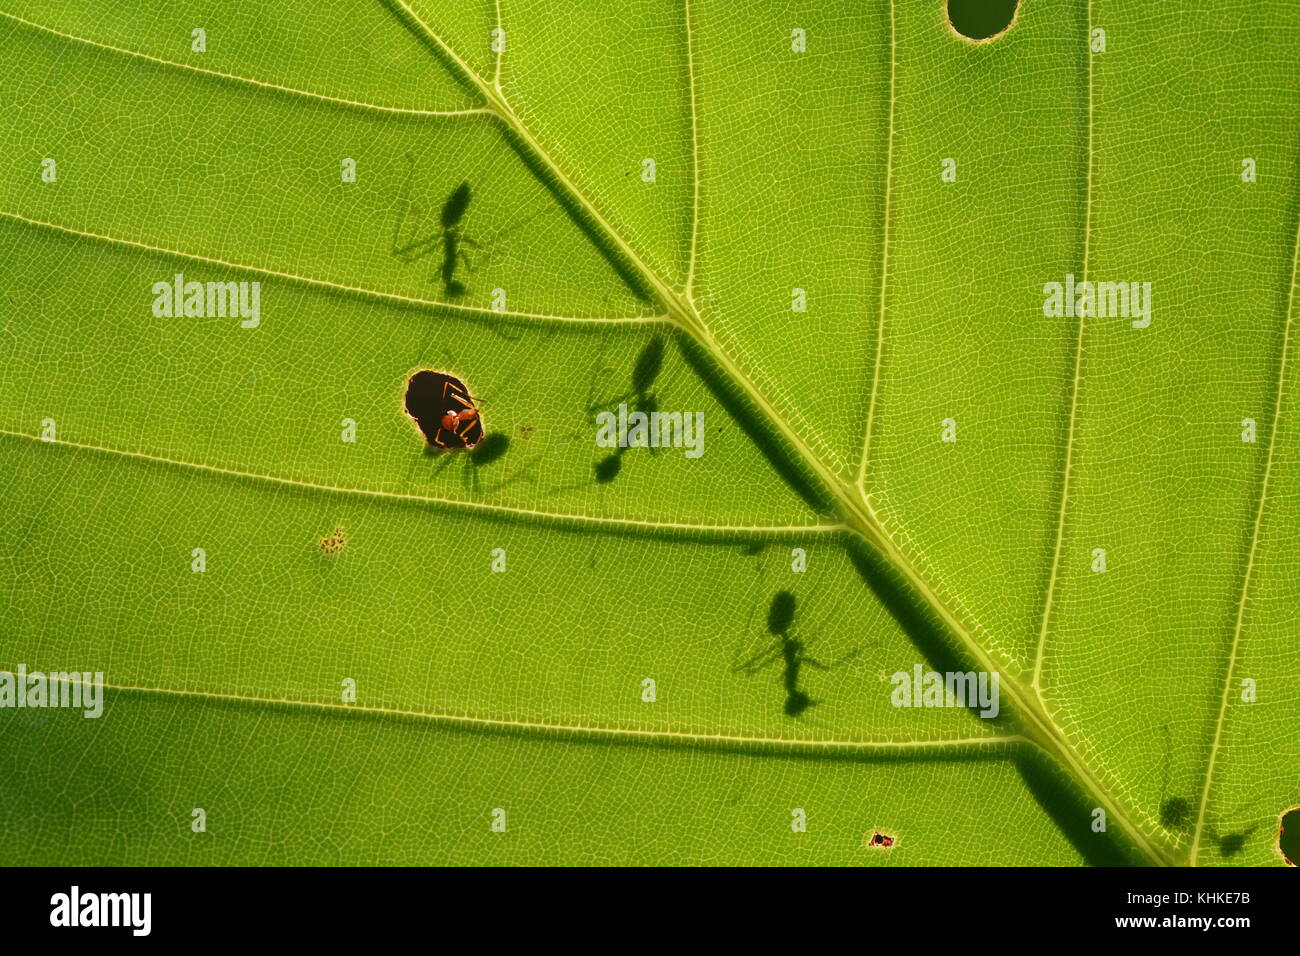 a team of red weaver ants silhouetted on a leaf, Borneo Stock Photo